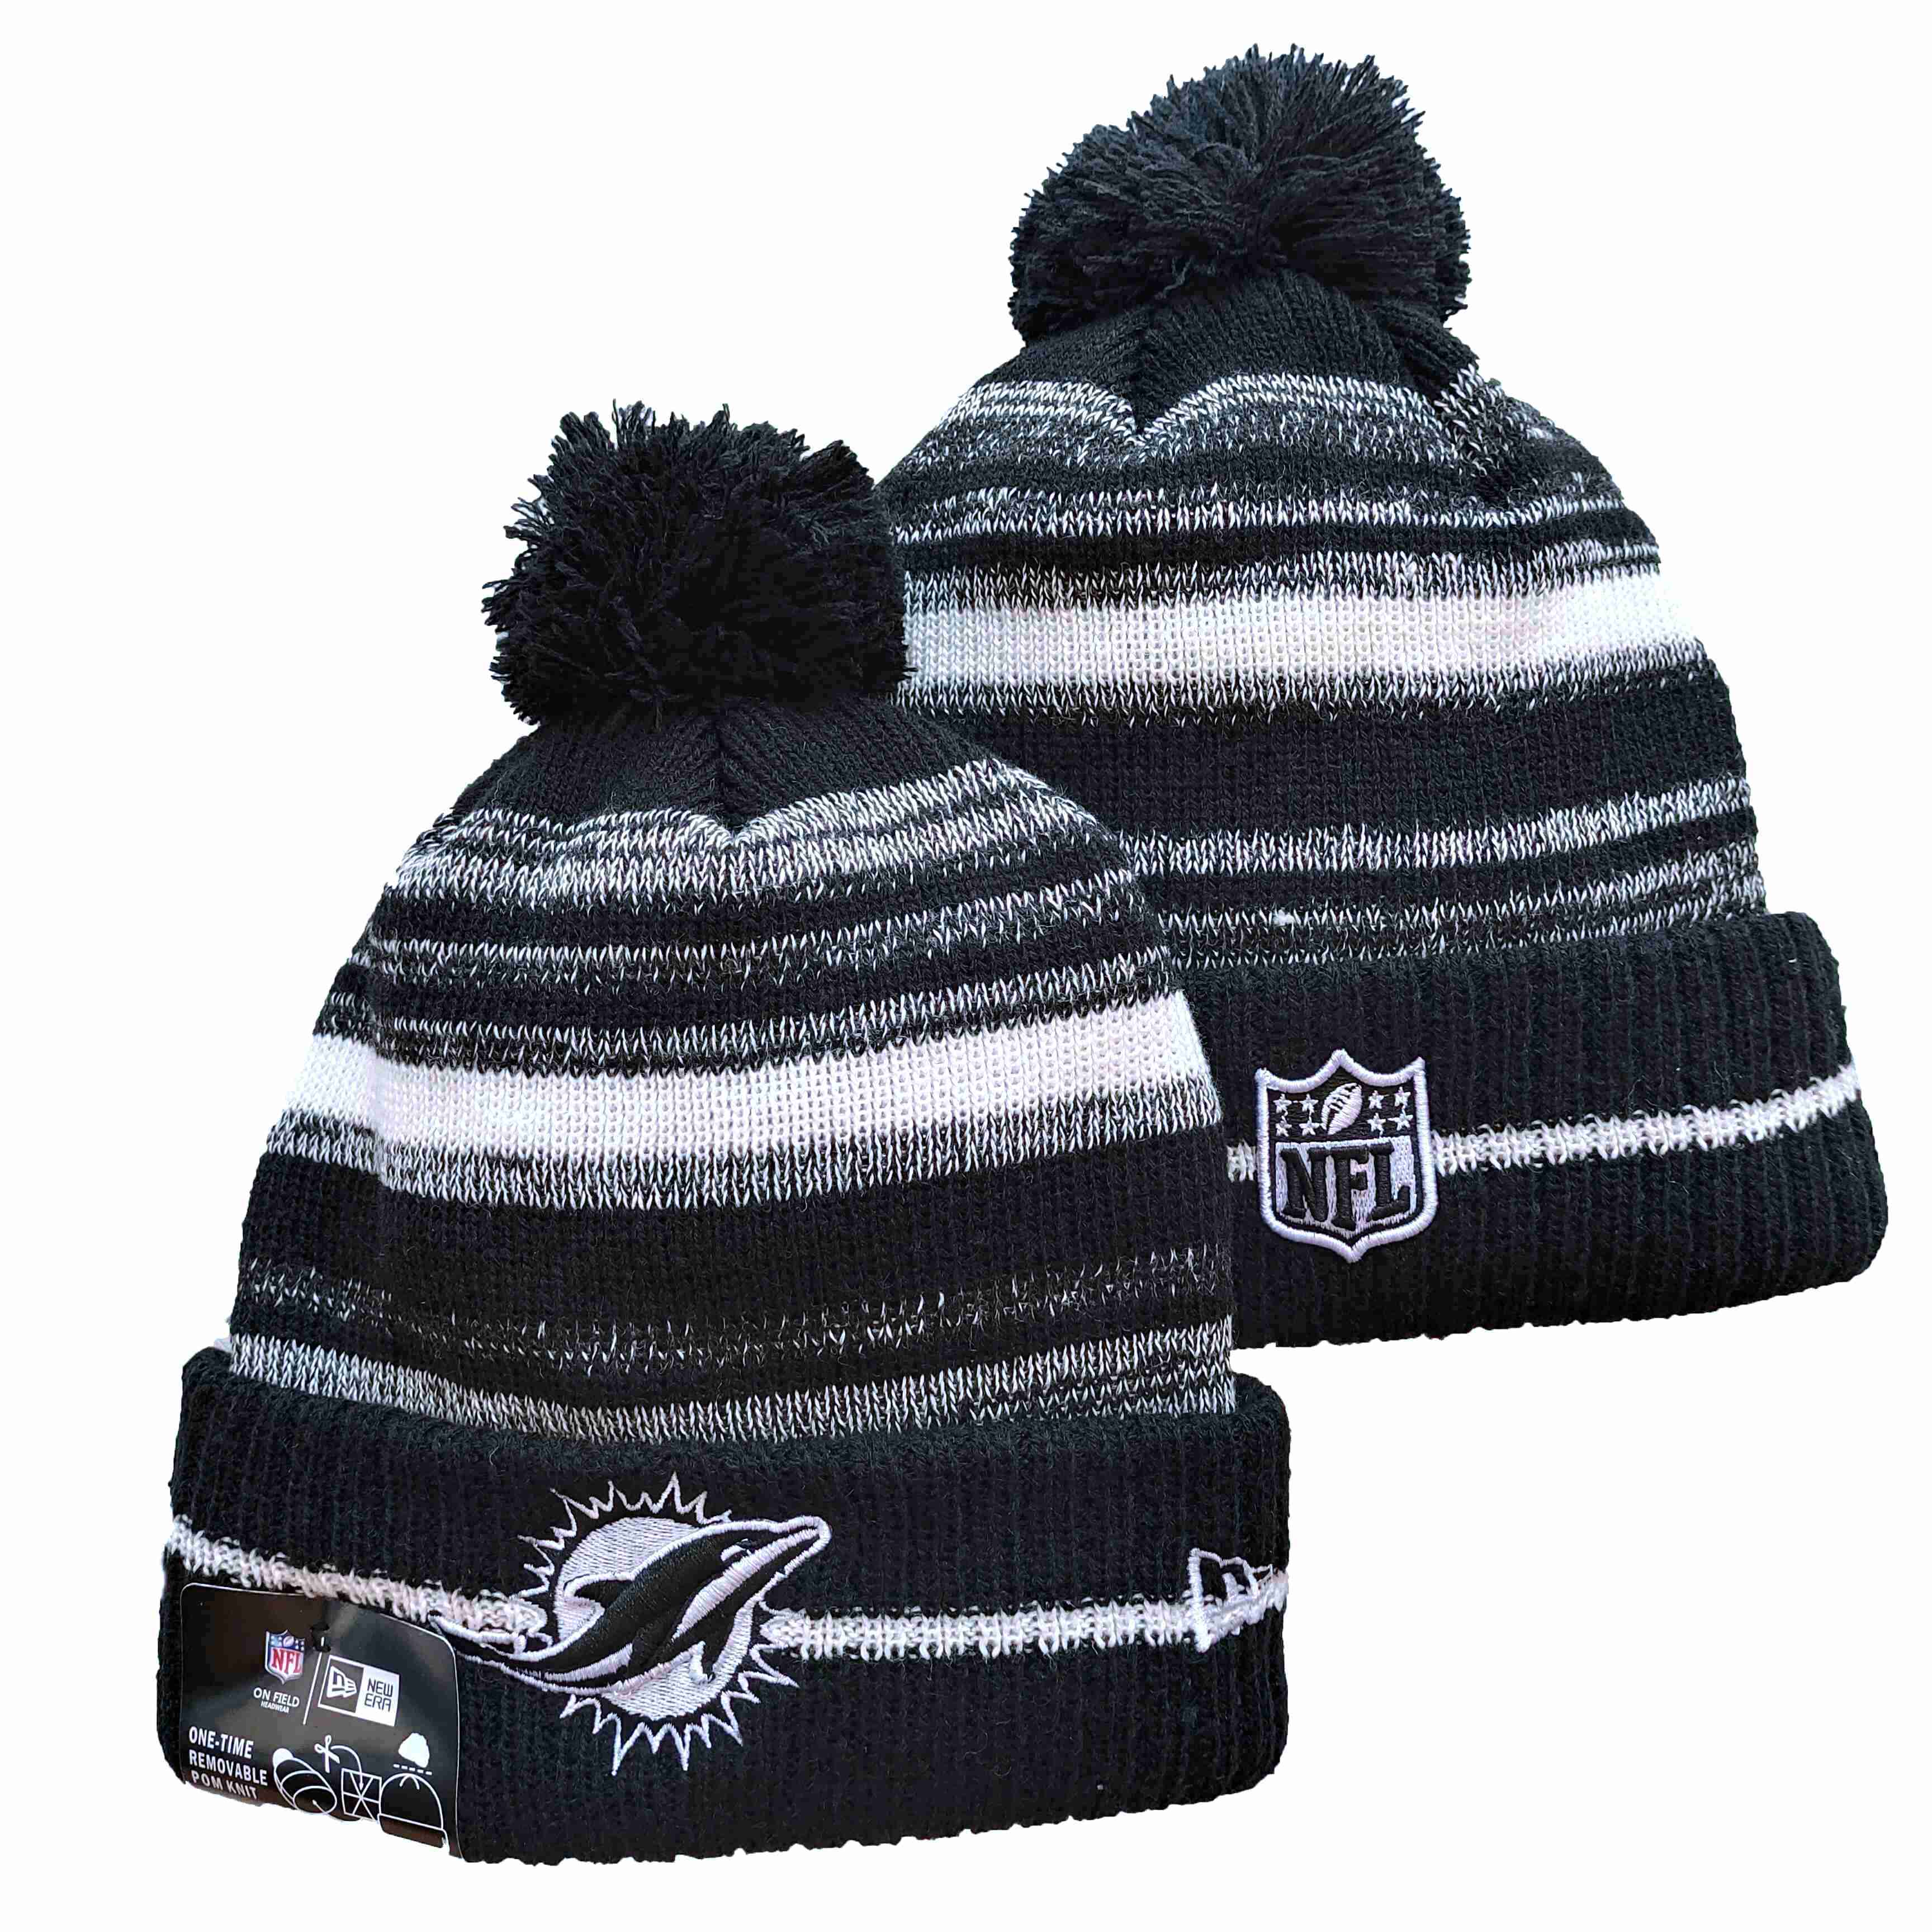 NFL Miami Dolphins Beanies Knit Hats-YD1034